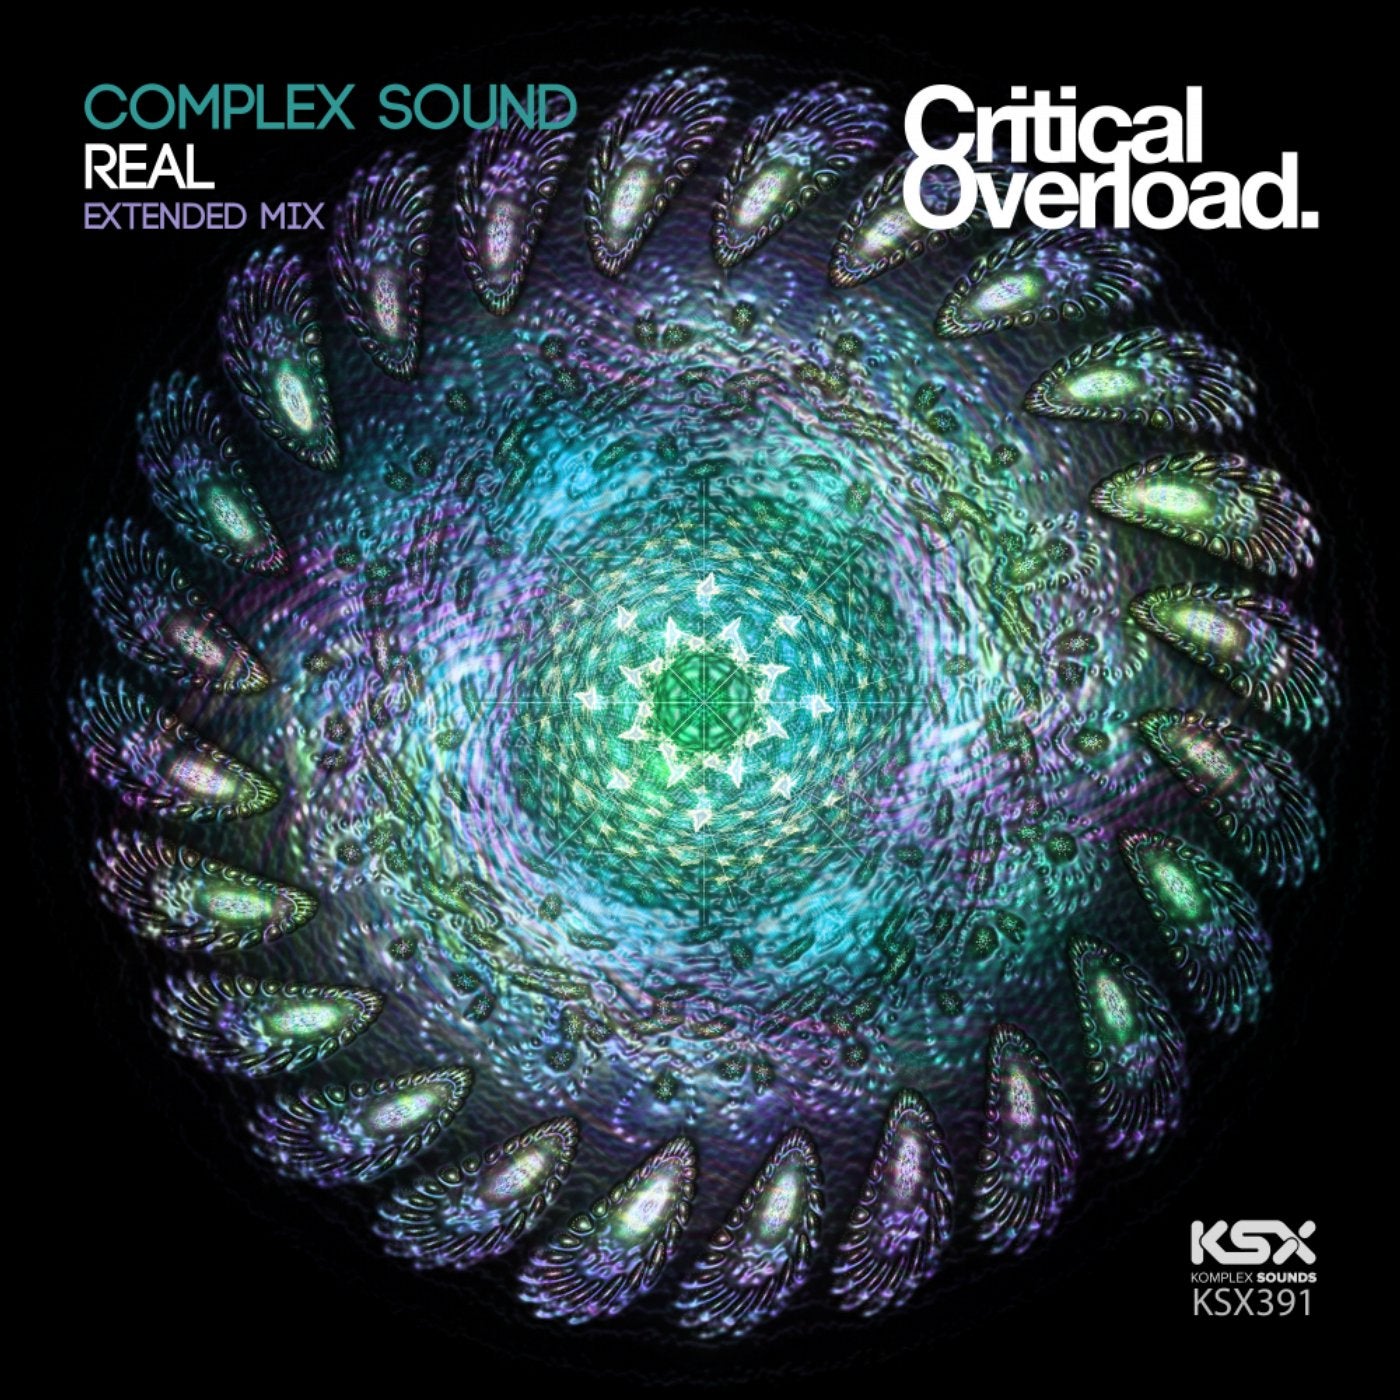 Real (Extended Mix)